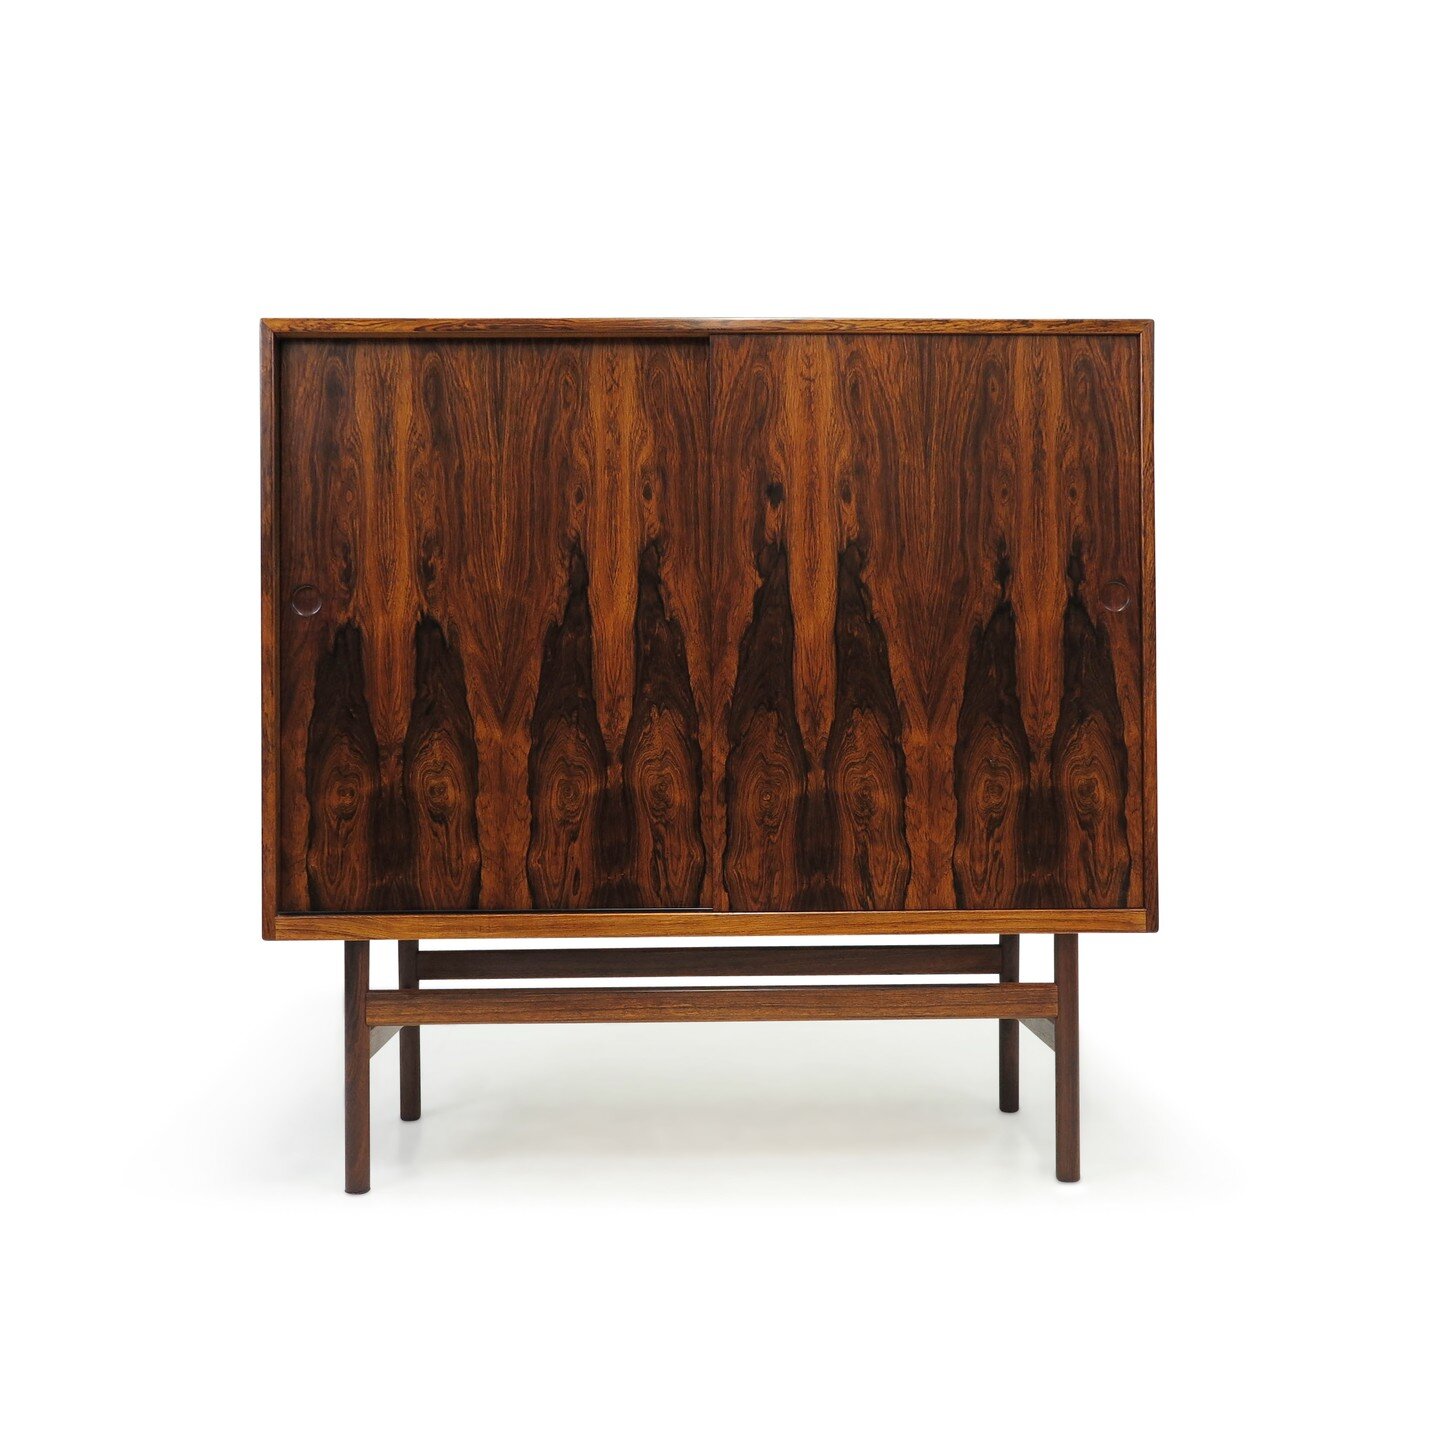 Exquisite #danish #cabinet featuring #stunning #brazilian #rosewood doors with beautiful grain patterns. Opens to reveal a white #oak interior with silverware drawers and adjustable shelves. Meticulously handcrafted with attention to detail, showcasi